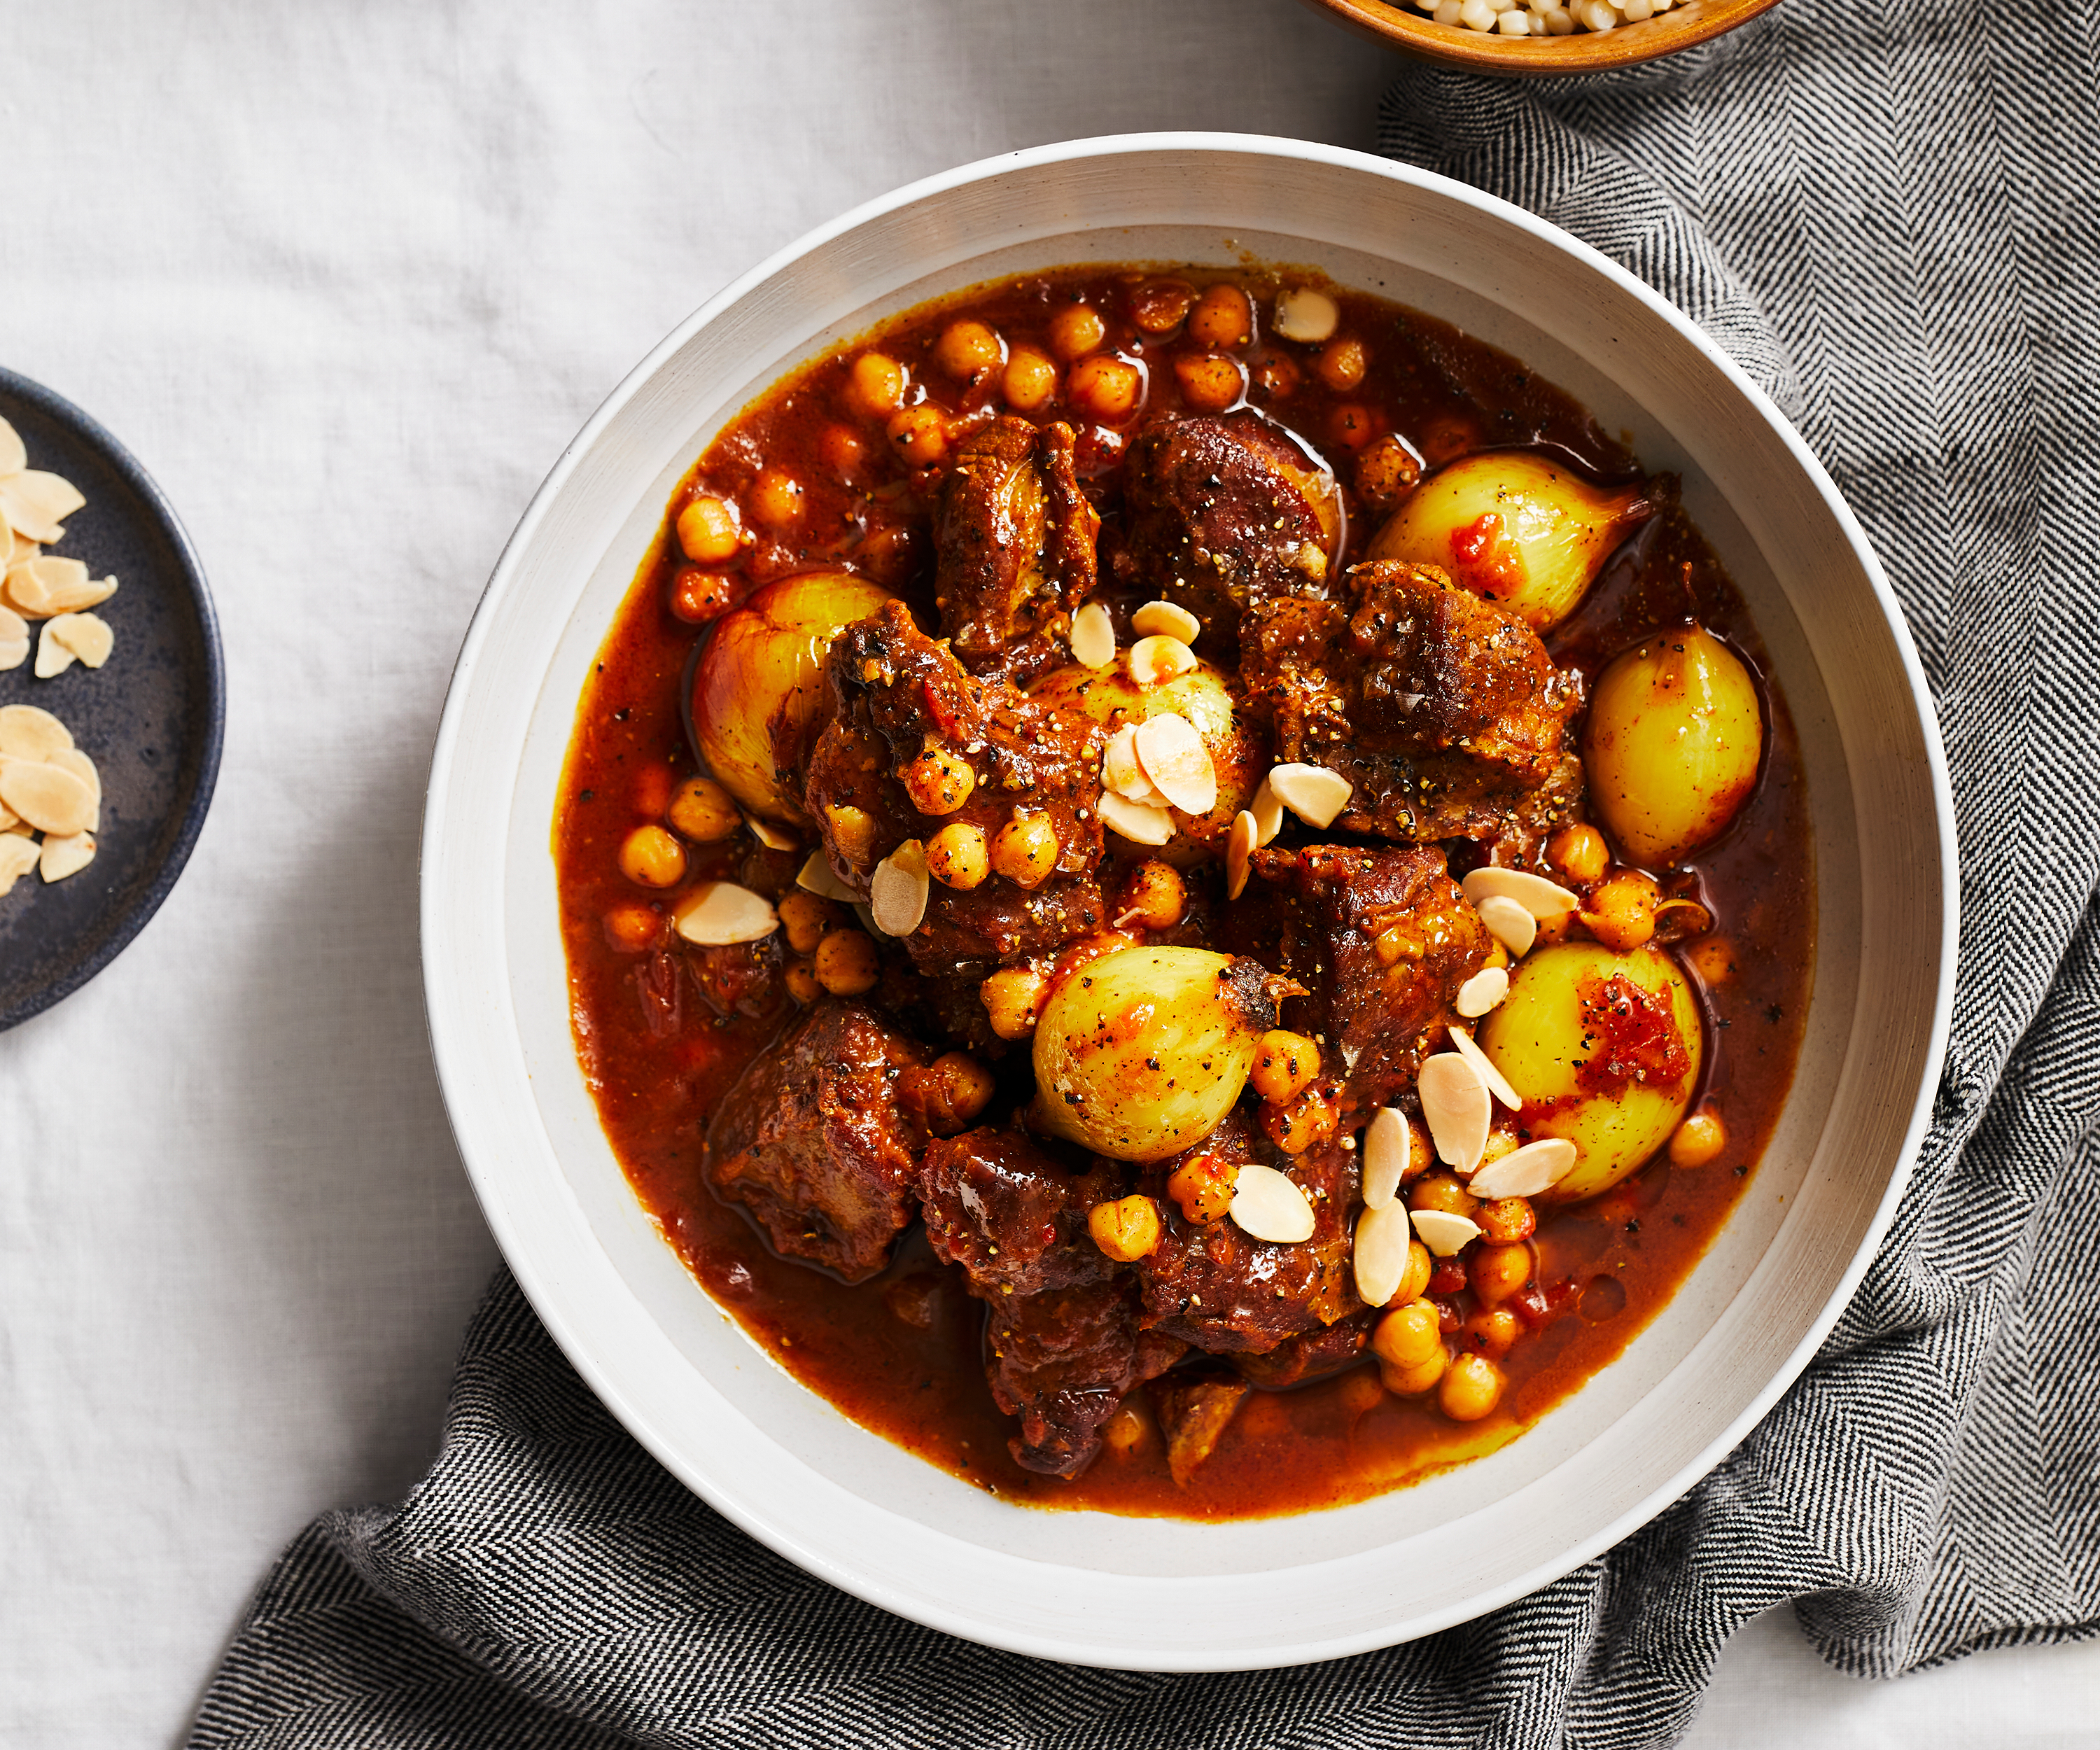 Bowl of Tunisian lamb stew with almonds.